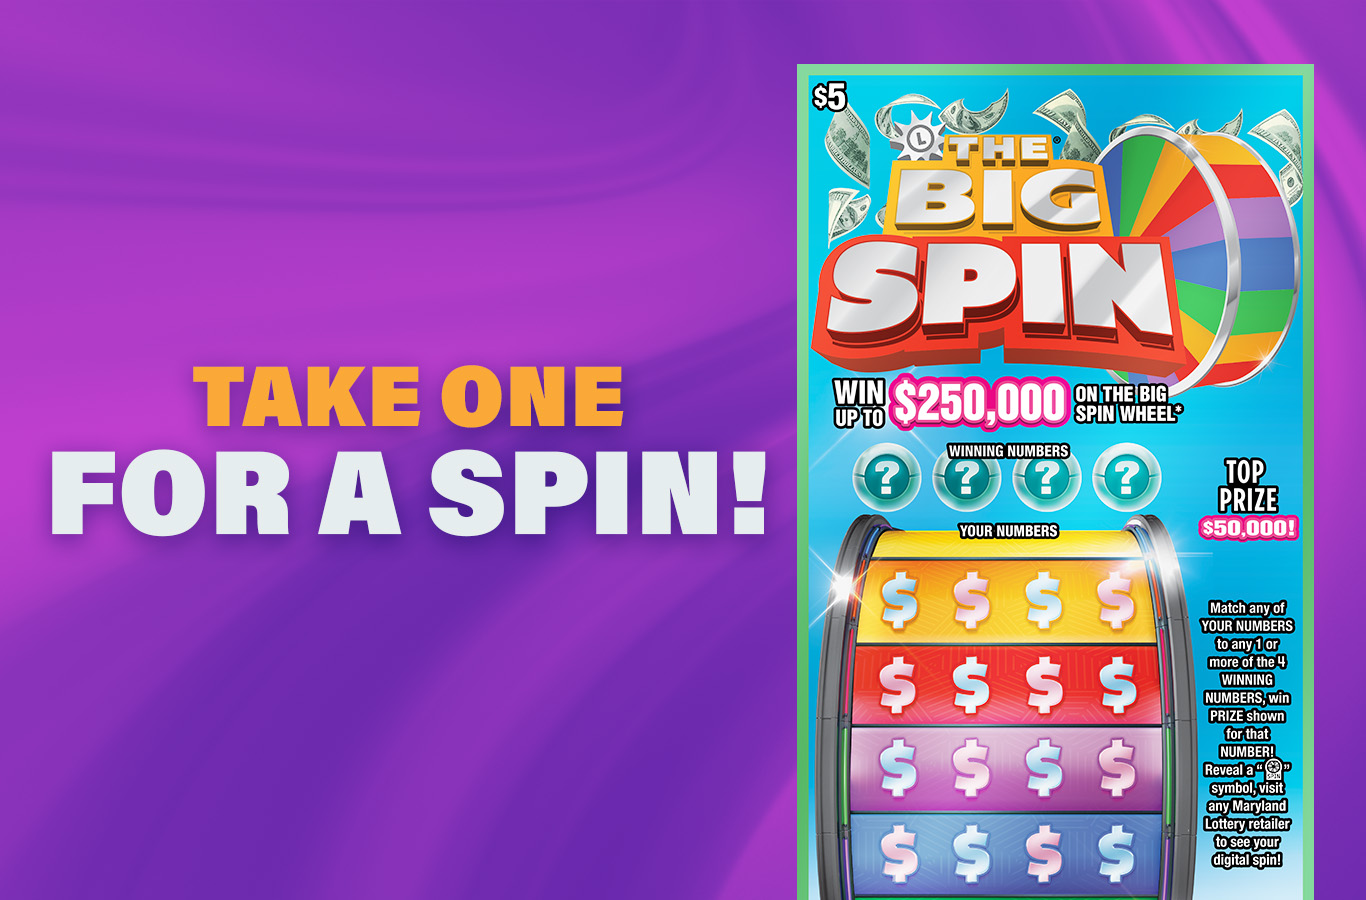 Wanna take a spin? You could win up to $50,000 instantly or a chance to spin The Big Spin Wheel for up to $250,000!